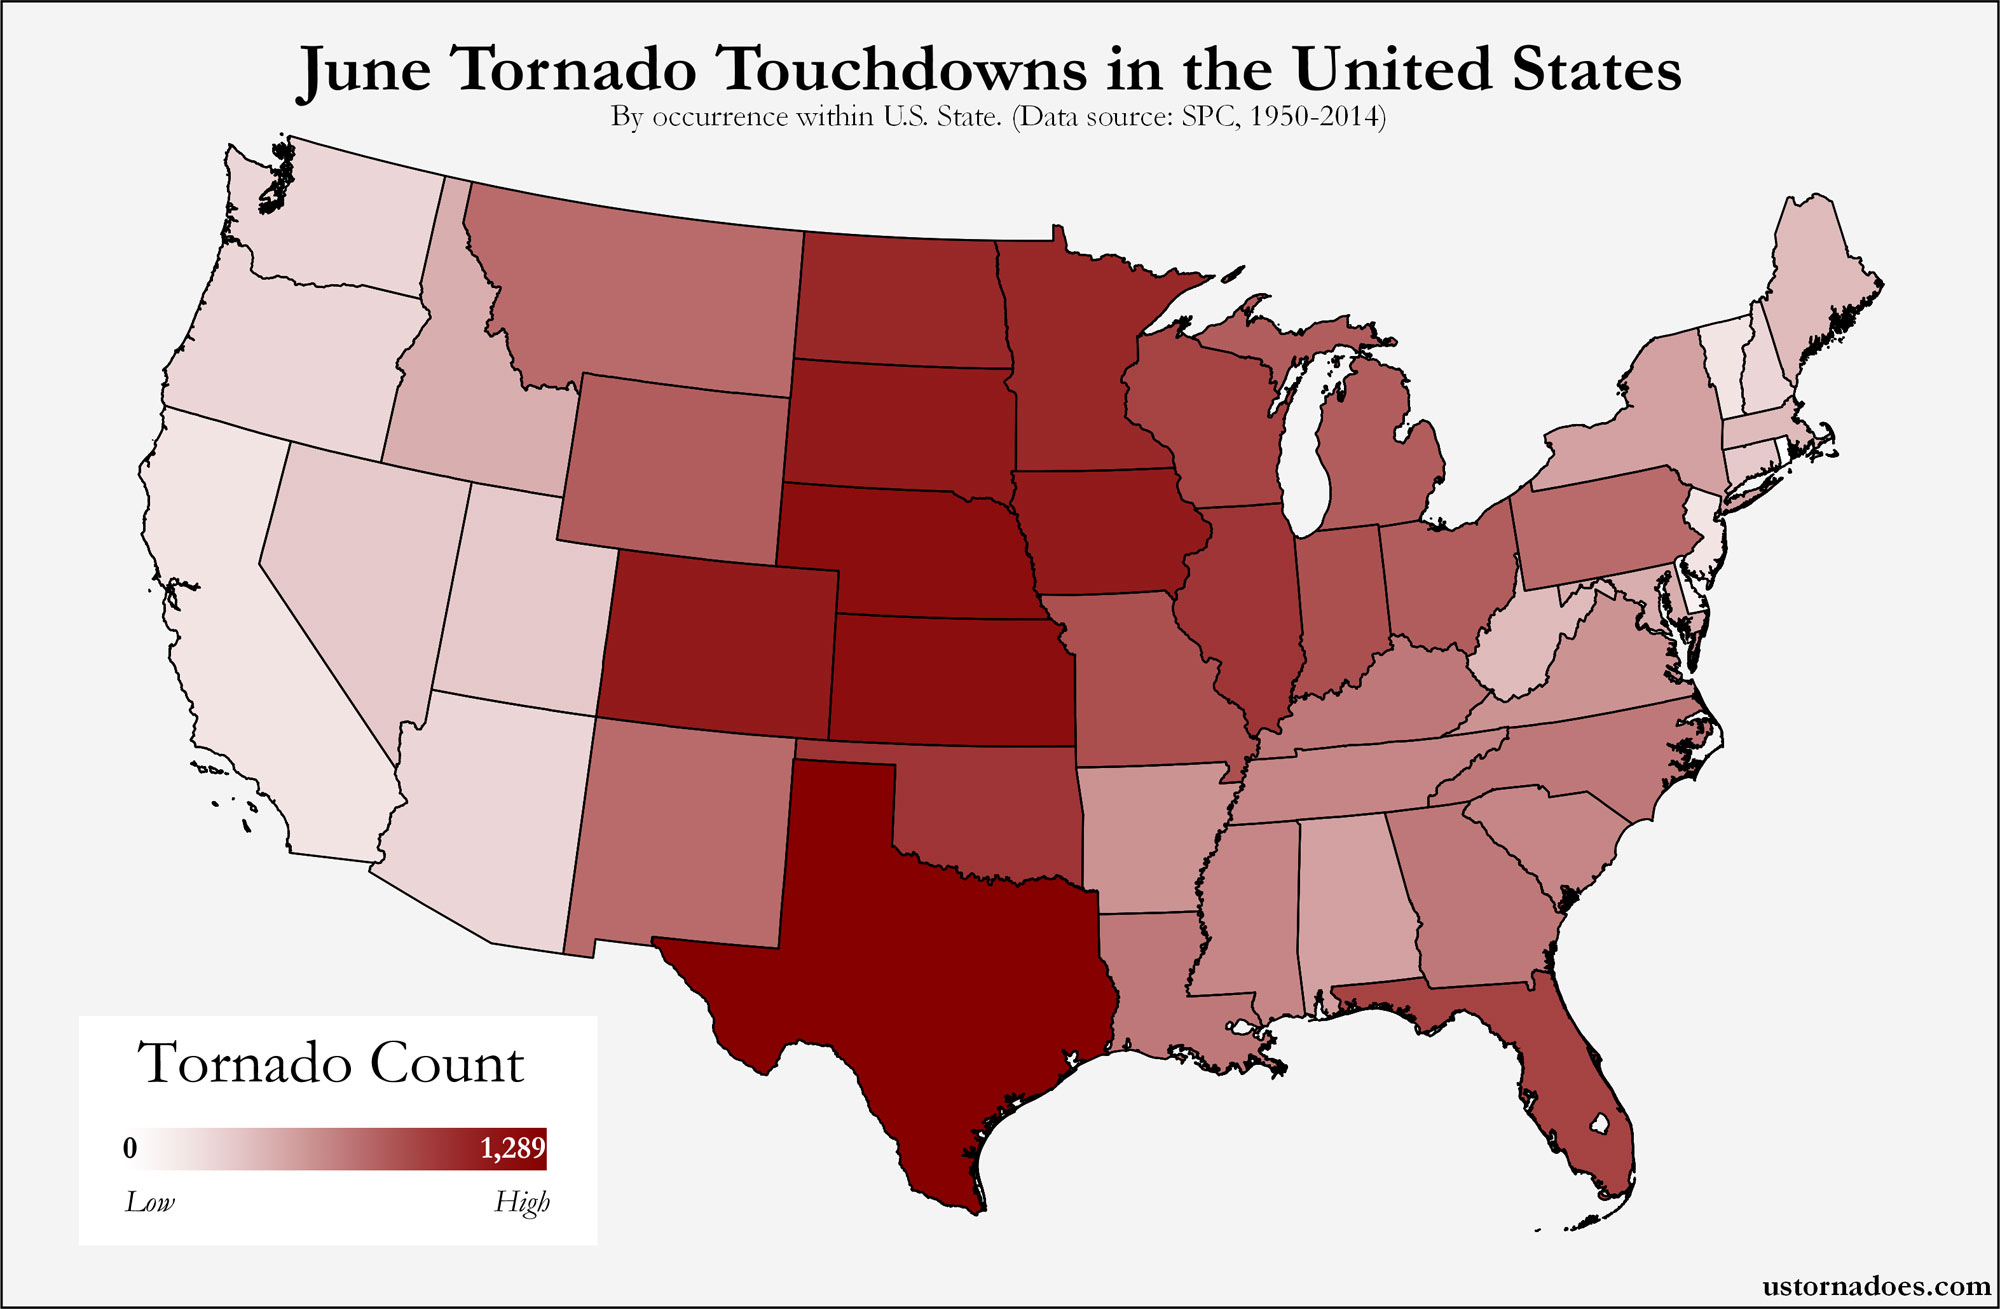 Here's where tornadoes typically form in June across the United States